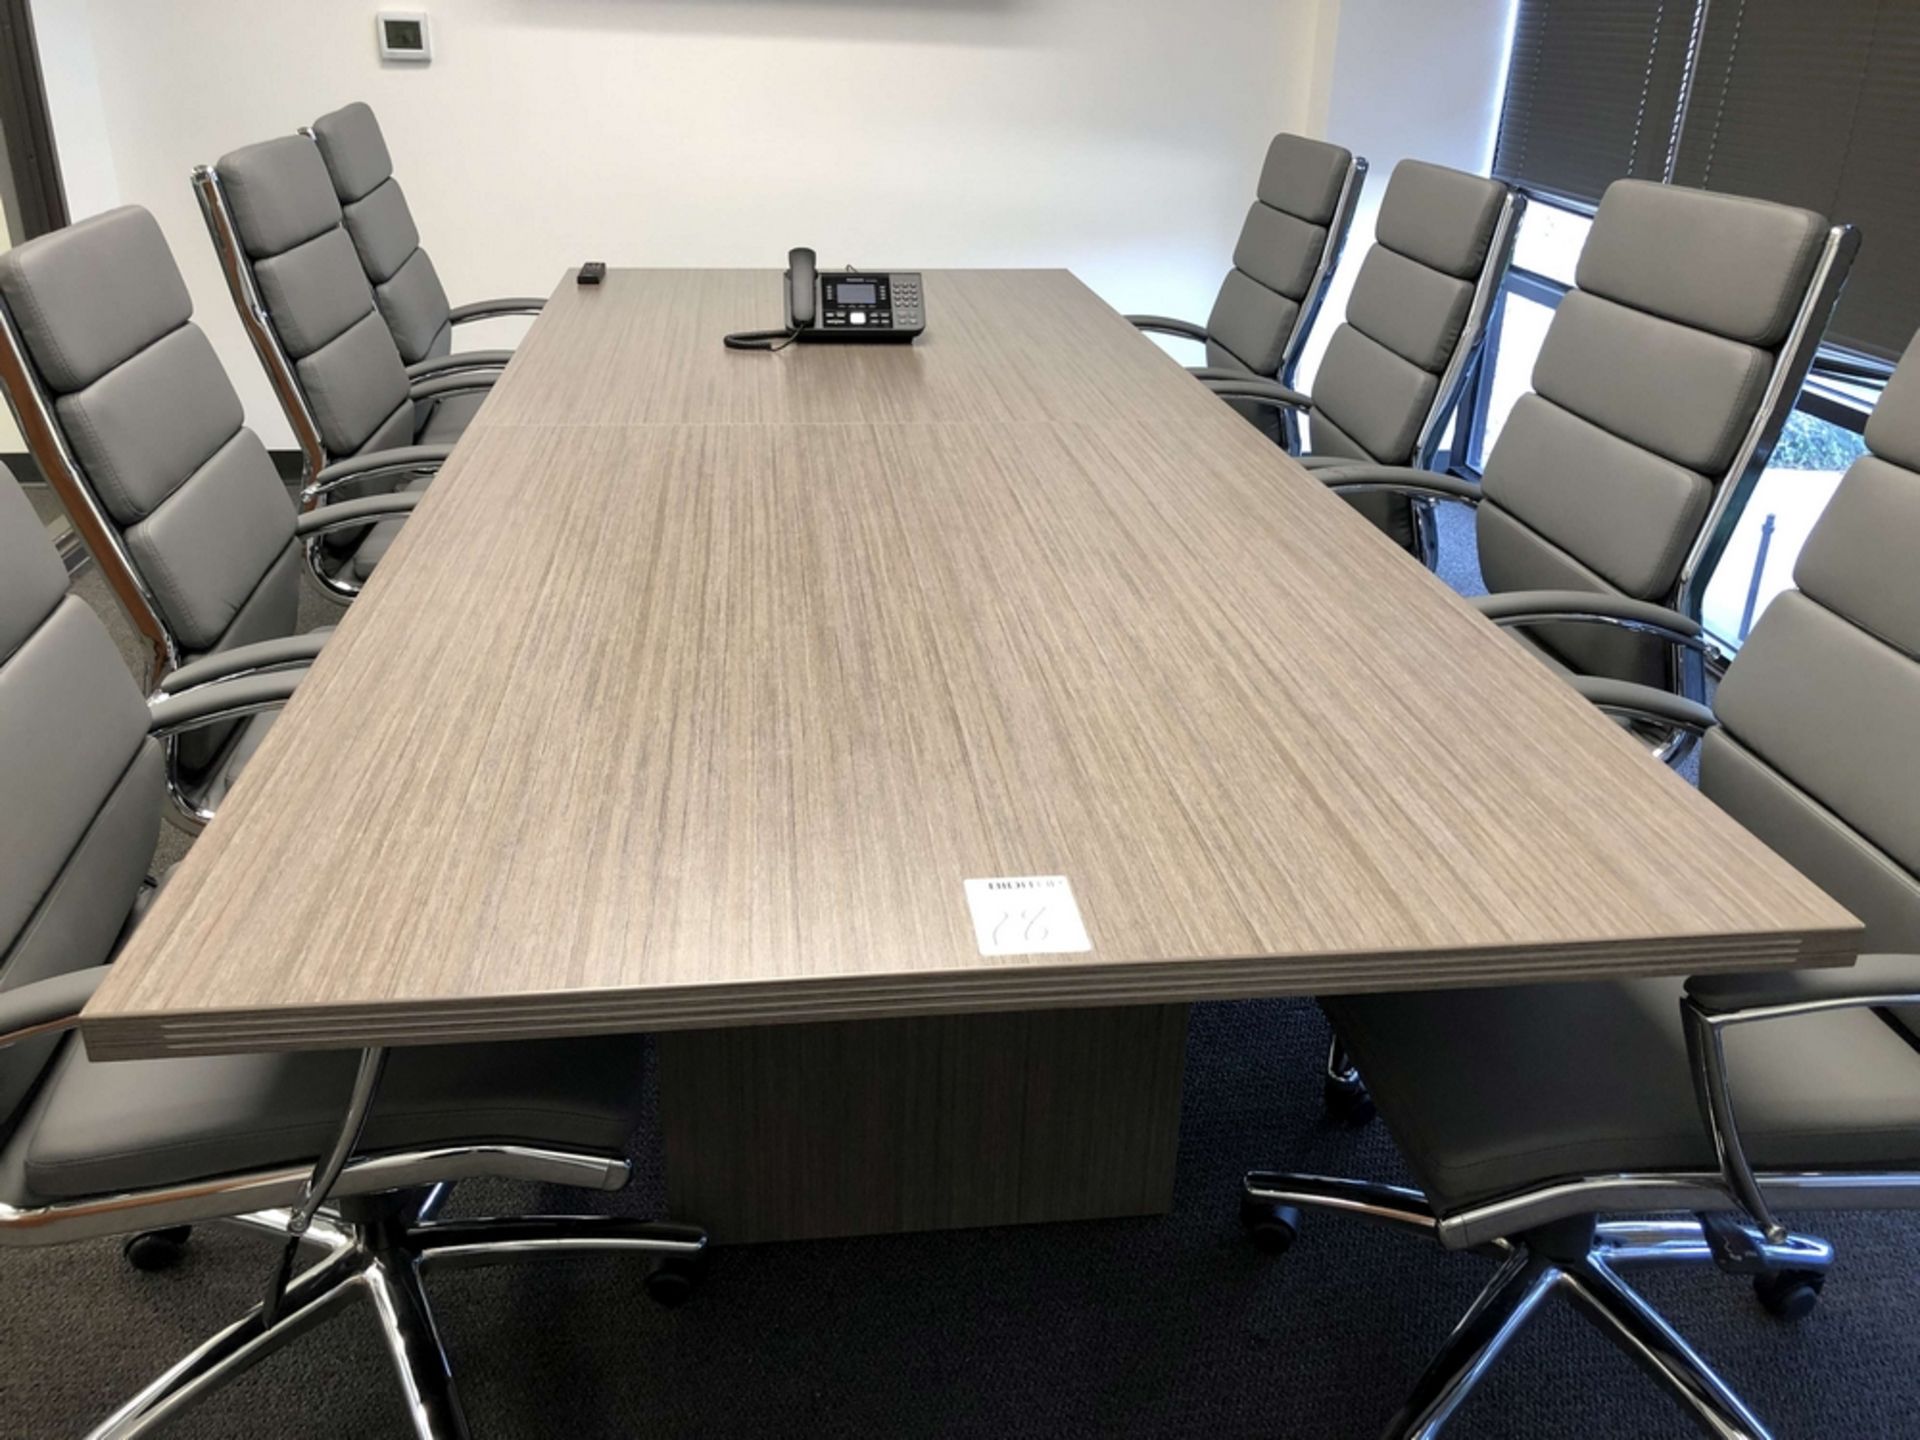 Conference Table (10' L x 47-1/4" W x 30"H), (8) Boss CaressoftPlus High-Back Executive Office - Image 2 of 5